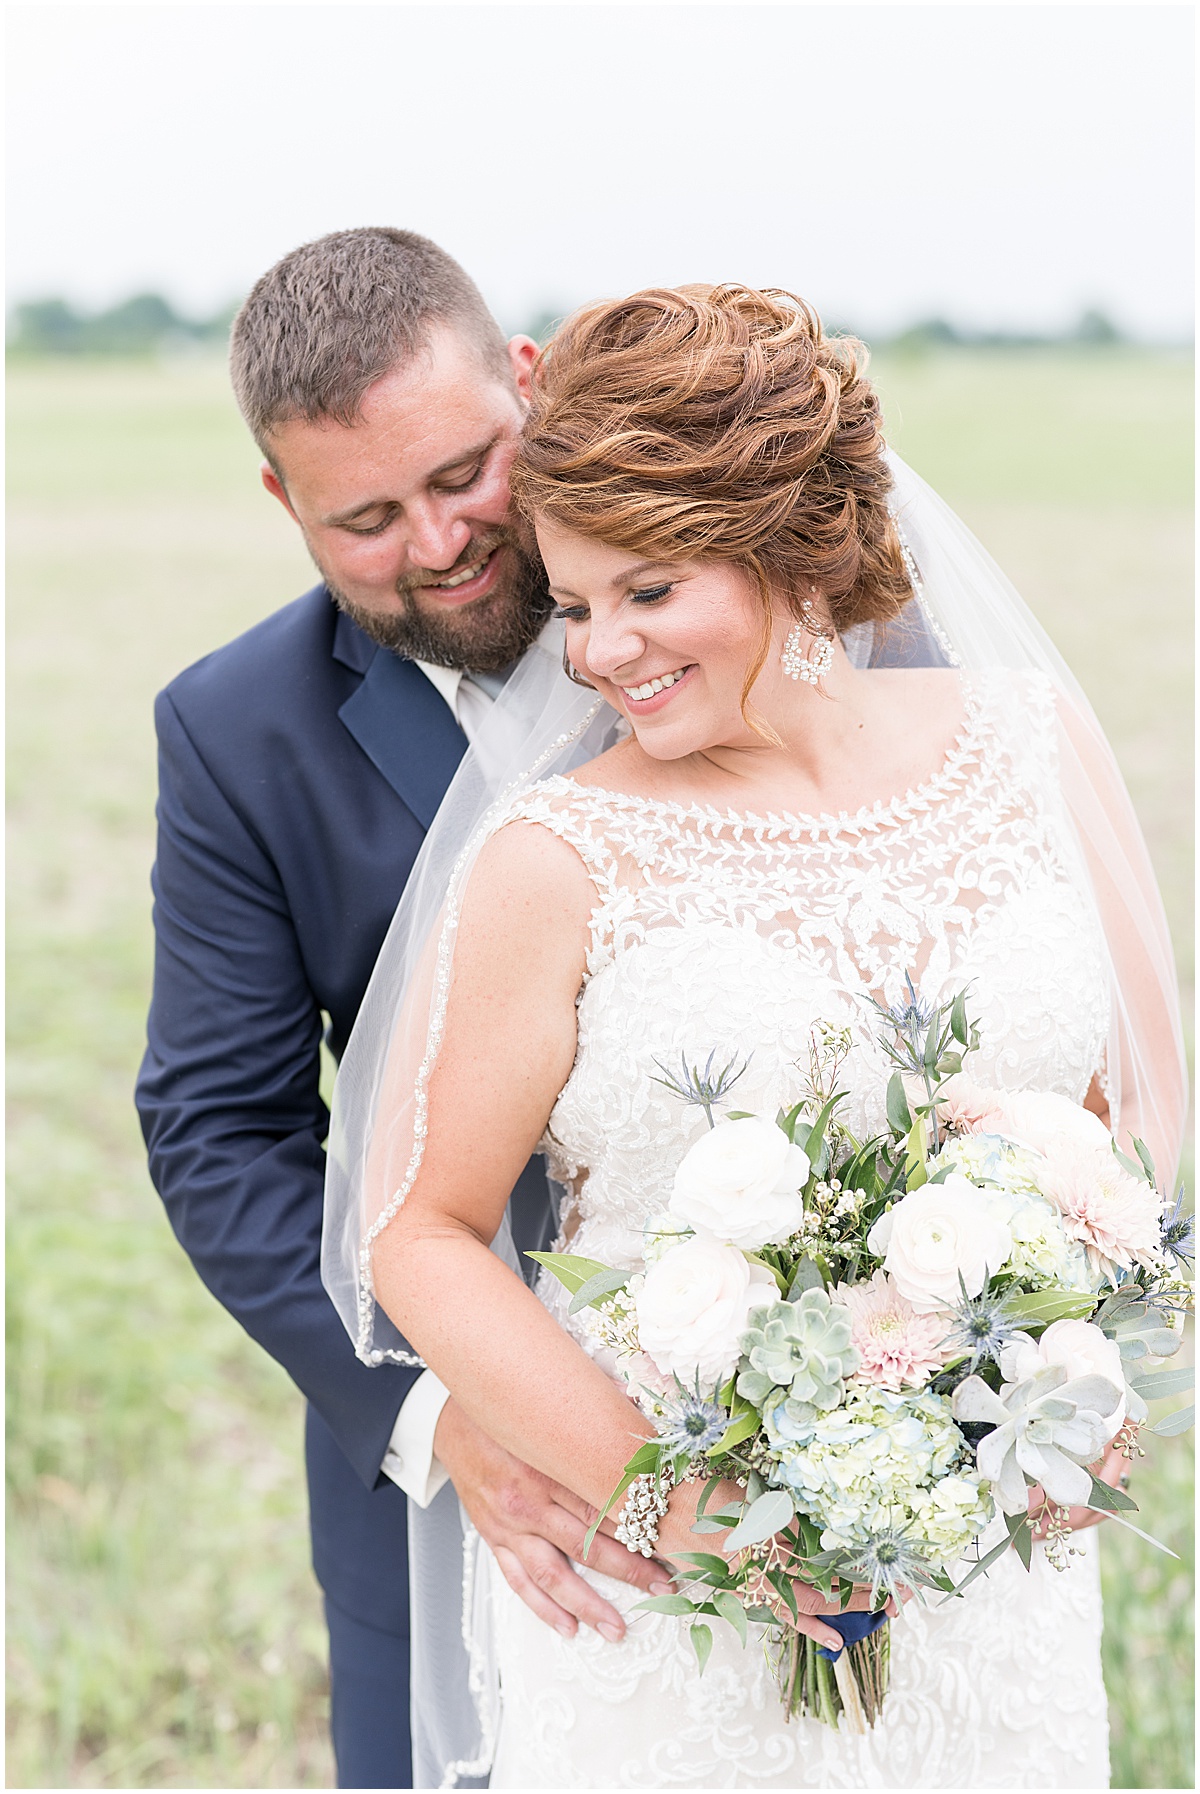 Bride and groom after wedding at The Brandywine in Monticello, Indiana photographed by Lafayette, Indiana wedding photographer Victoria Rayburn